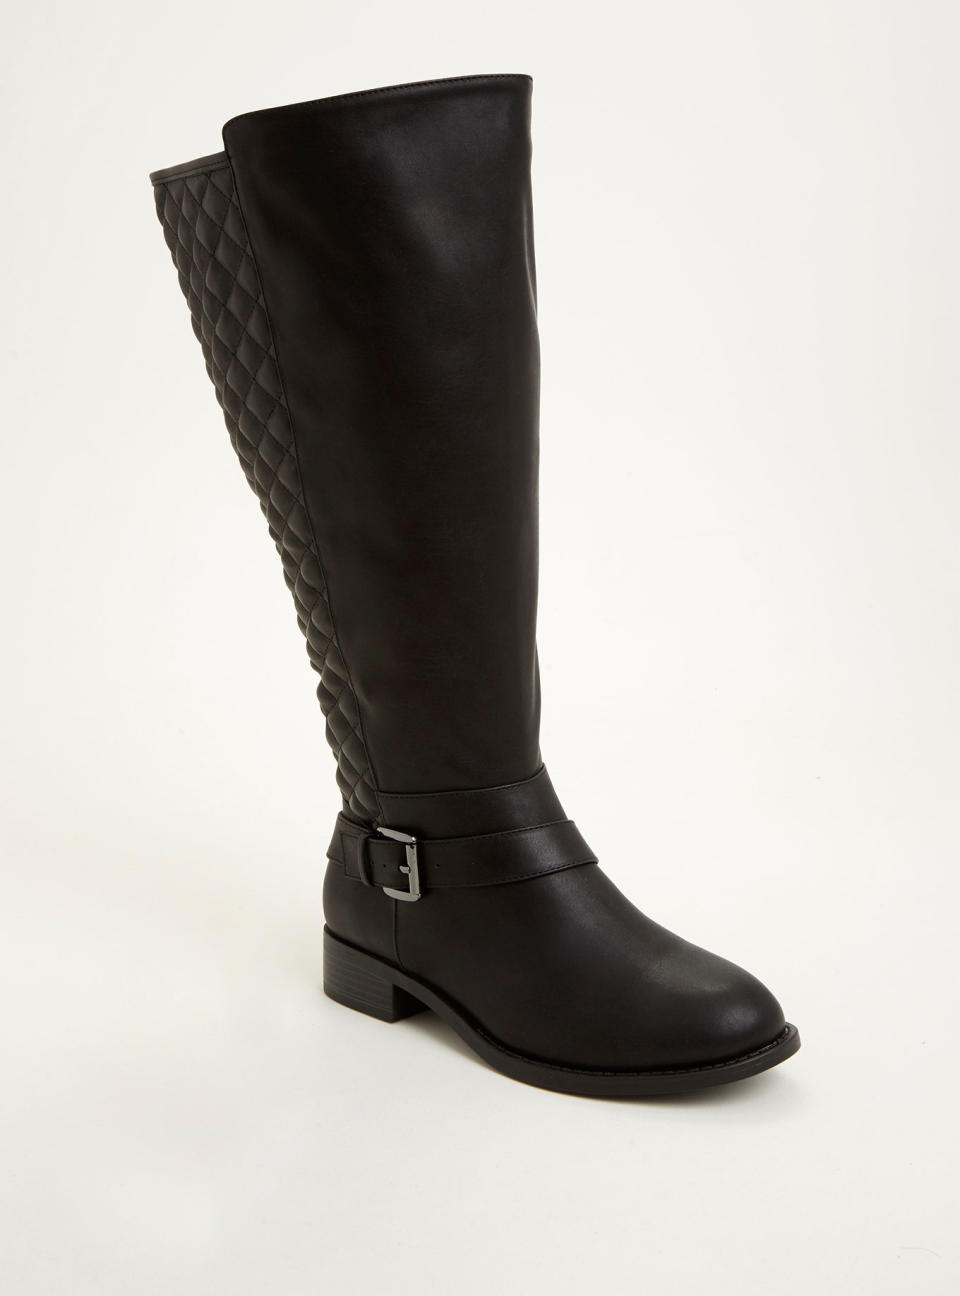 <a href="http://www.torrid.com/product/quilted-side-zip-buckle-knee-high-boots-wide-width-wide-calf/10963125.html?cgid=shoes-boots#start=6" target="_blank">Shop them here</a>.